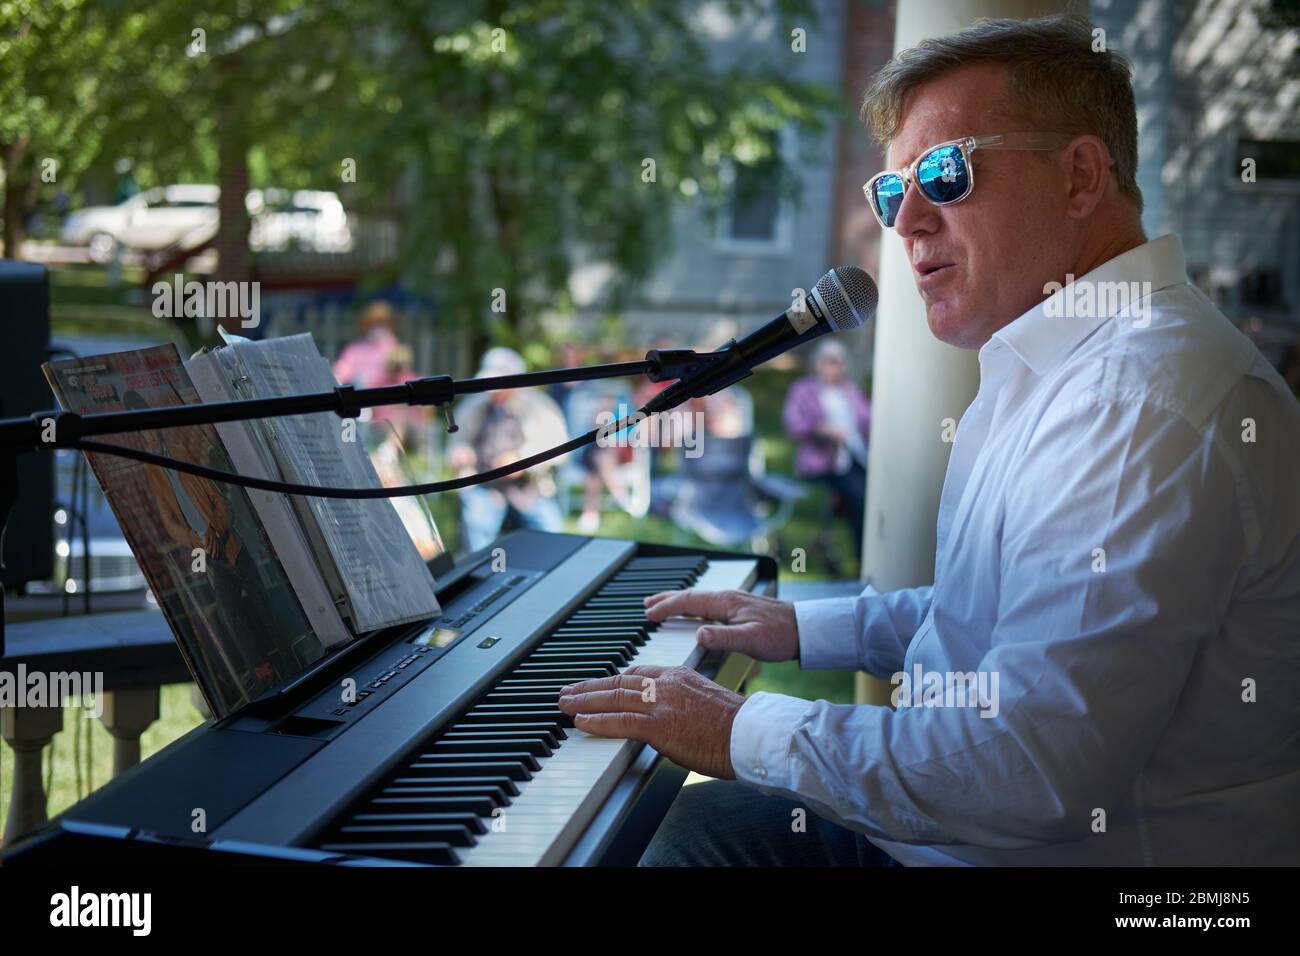 caucasian man wearing white shirt playing an electric keyboard to a crowd outdoors at a Summer porch concert in a historic residential neighborhood Stock Photo